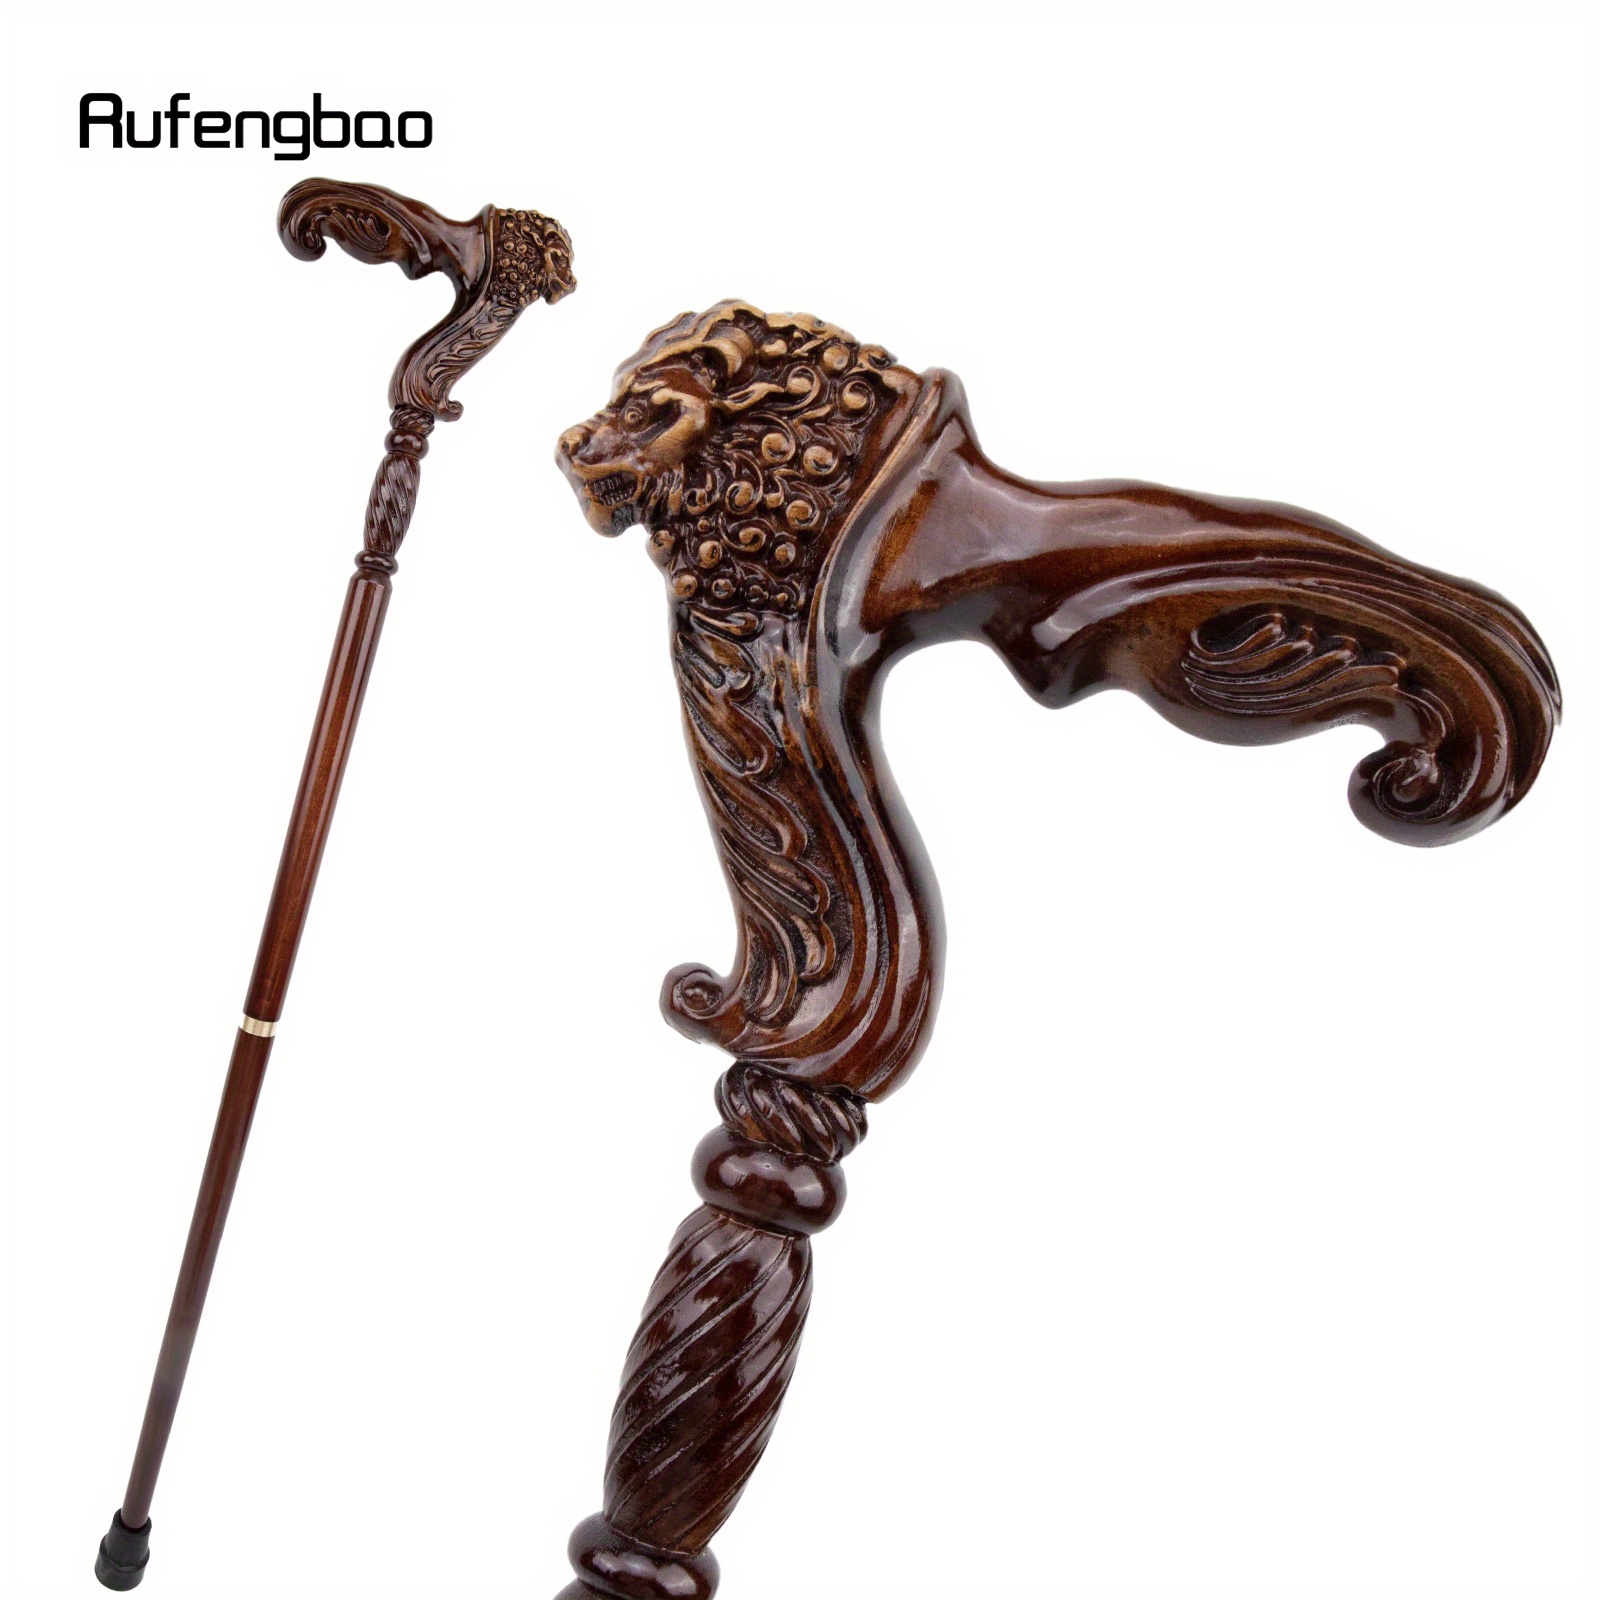  Fox Long Hair Animal Fashion Walking Stick Decorative Walking  Stick Cospaly Vintage Party Fashionable Walking Cane Crosier 93cm :  Clothing, Shoes & Jewelry